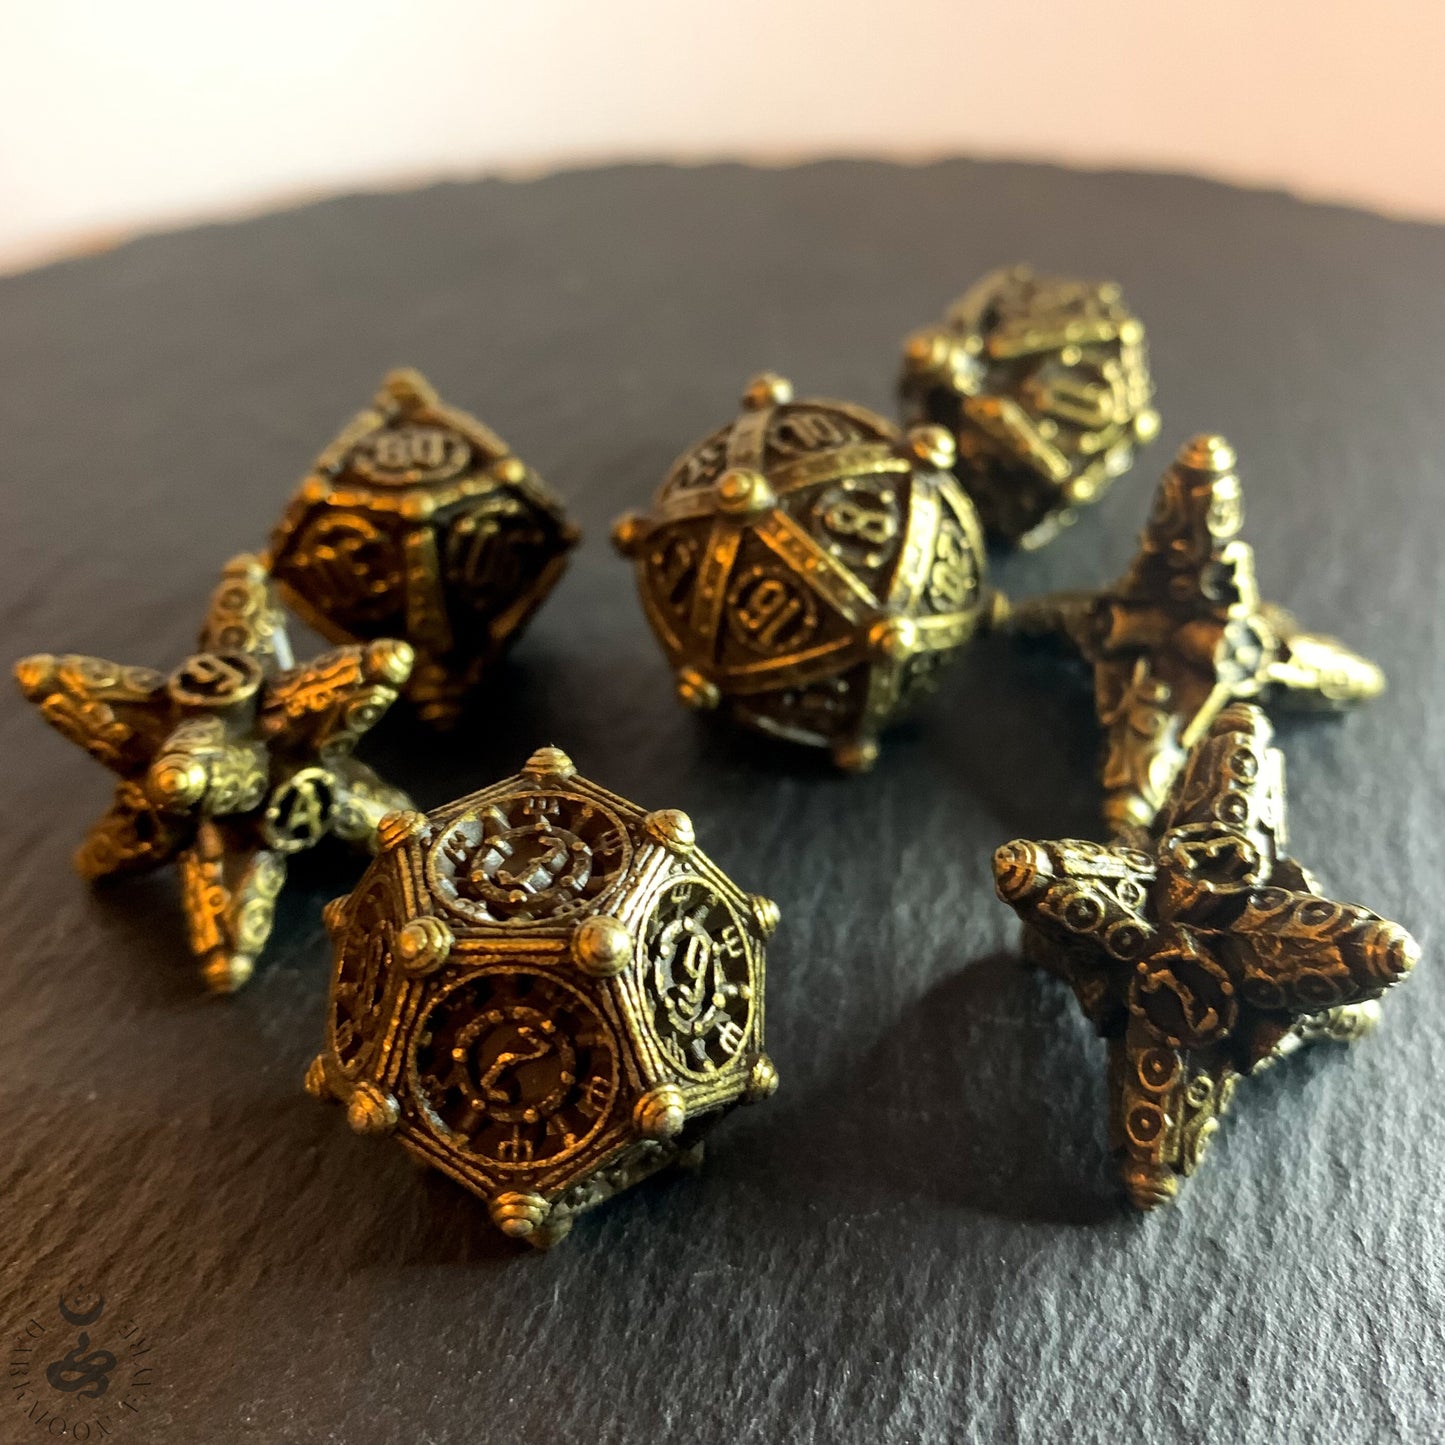 DnD 7 Bronze Ancient Mechanical Solid Heavy Metal Polyhedral Dice Set With A Fairtrade Cotton Storage Pouch - Darkmoon Fayre